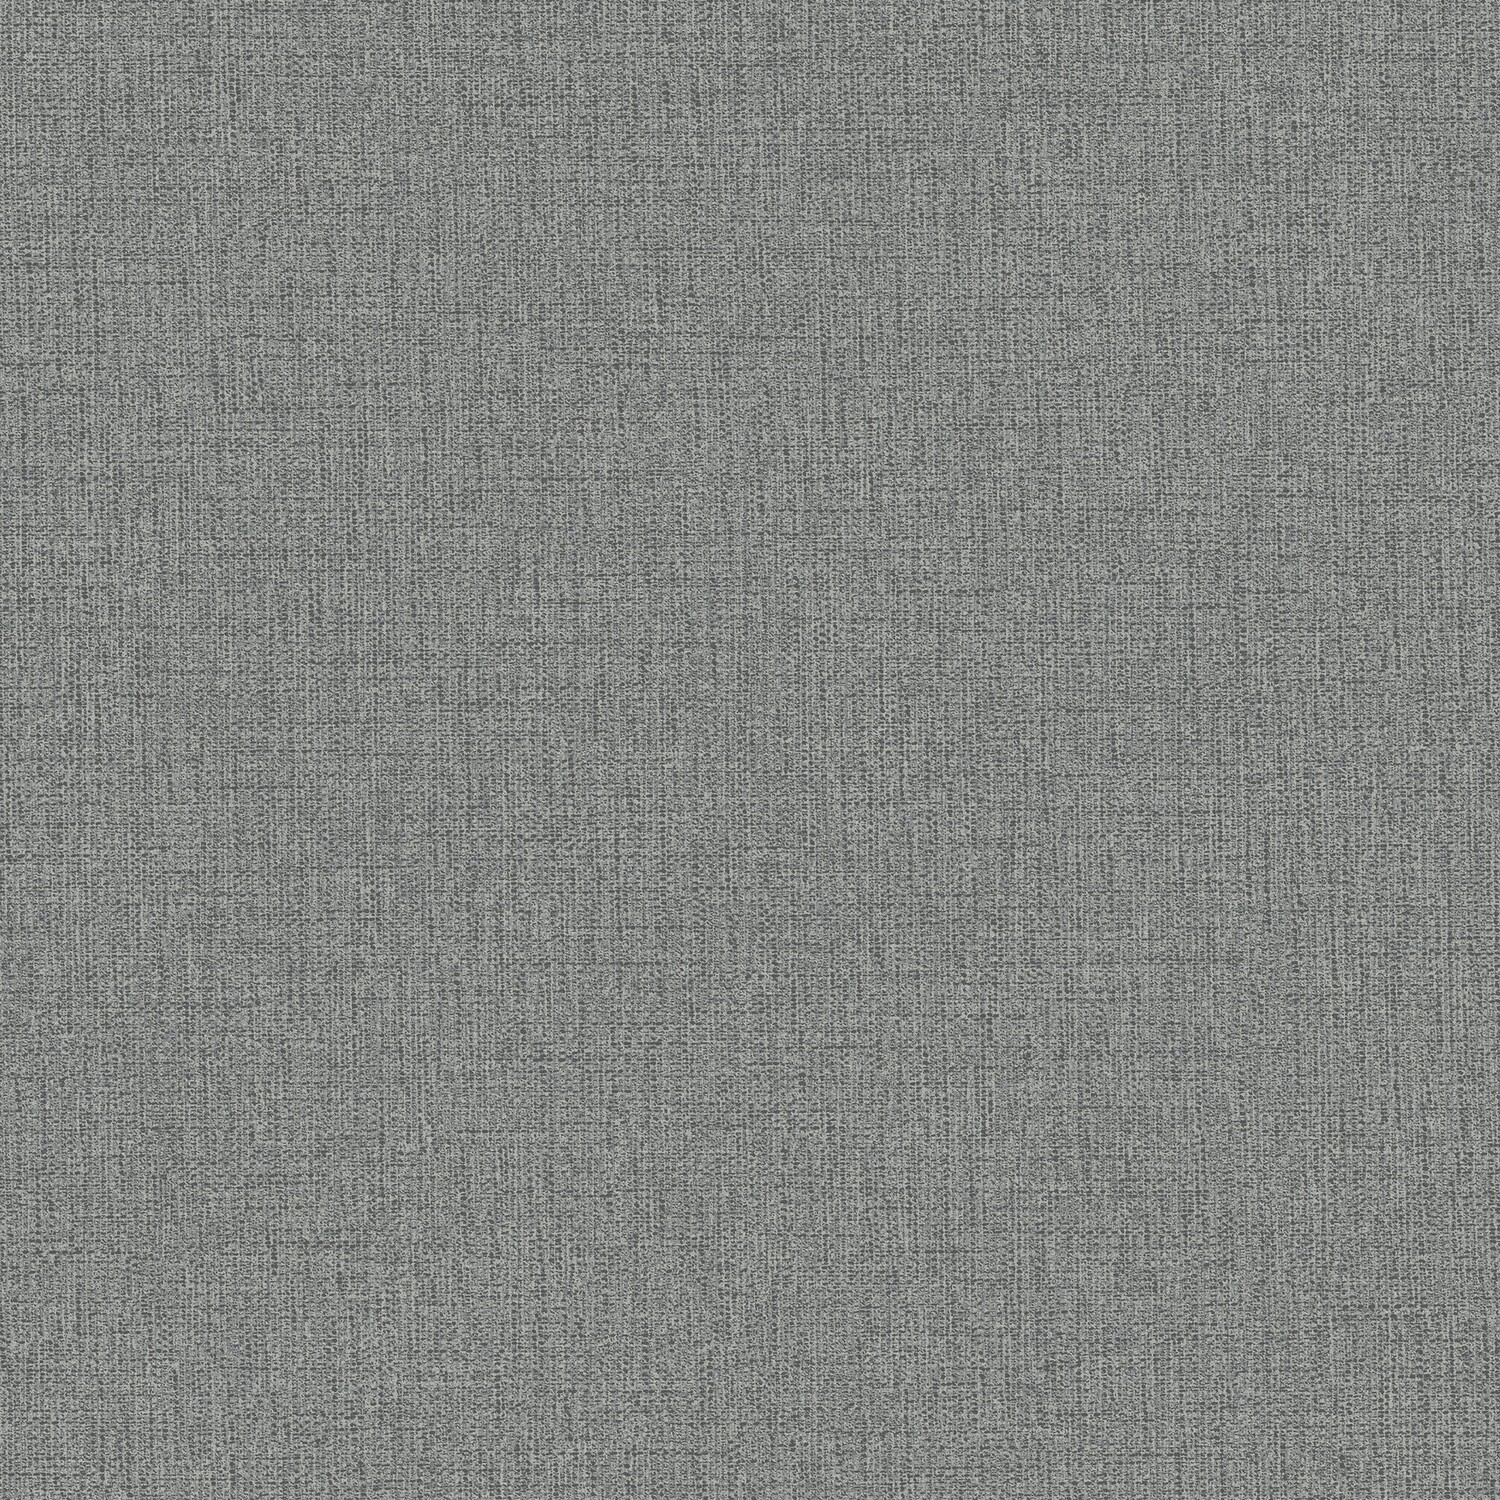 Twill Charcoal Textured Wallpaper Image 1